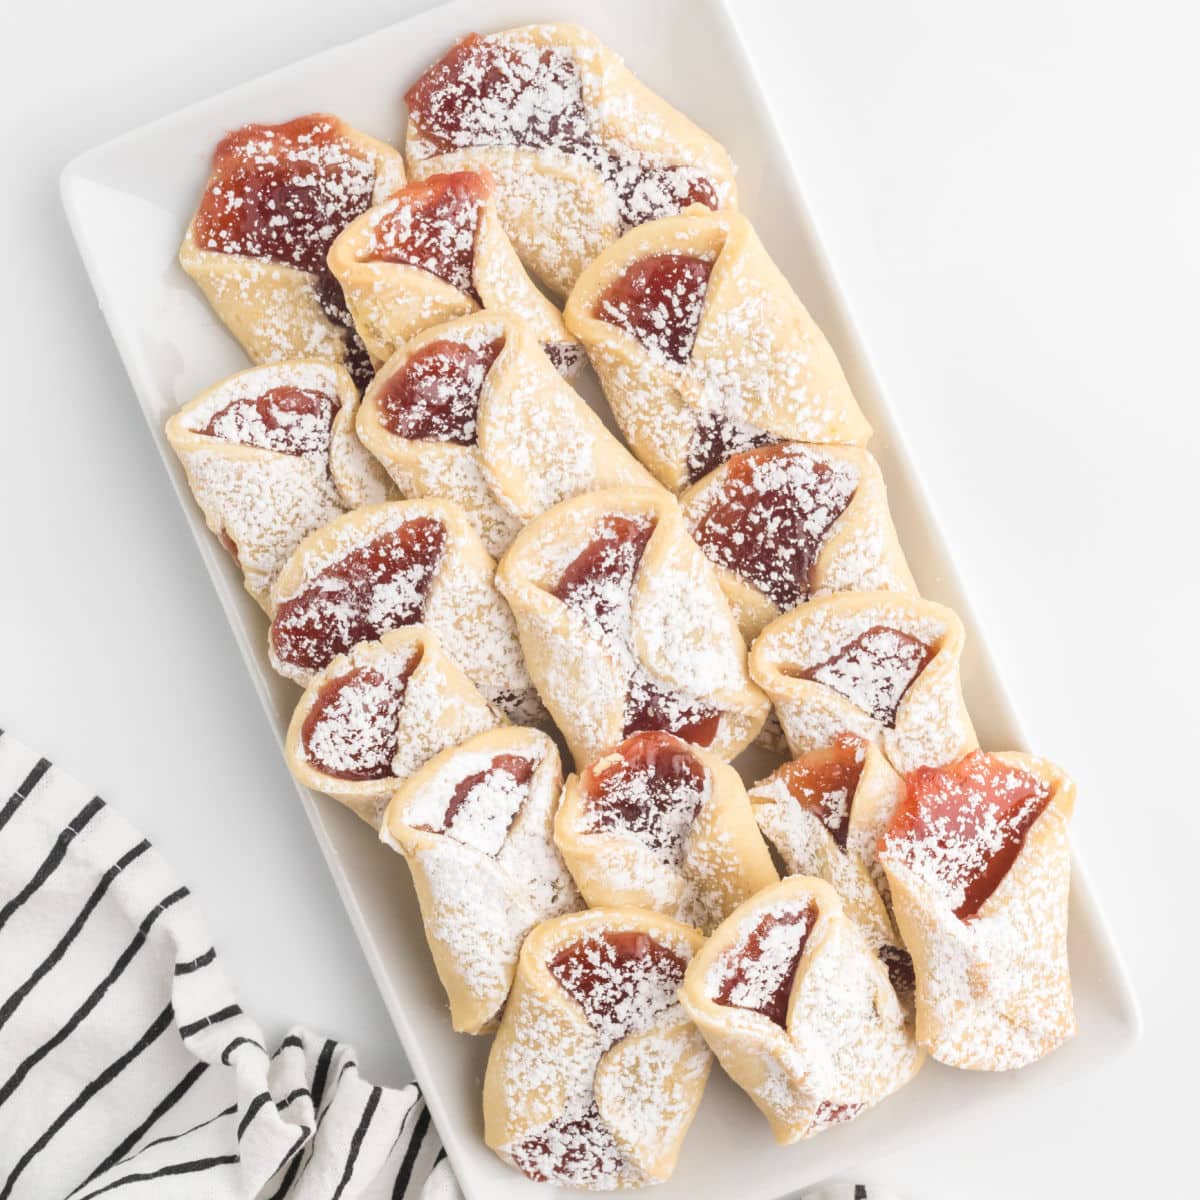 A white dessert plate filled with pizzicati, which are Italian pinch cookies filled with strawberry jam or nutella.